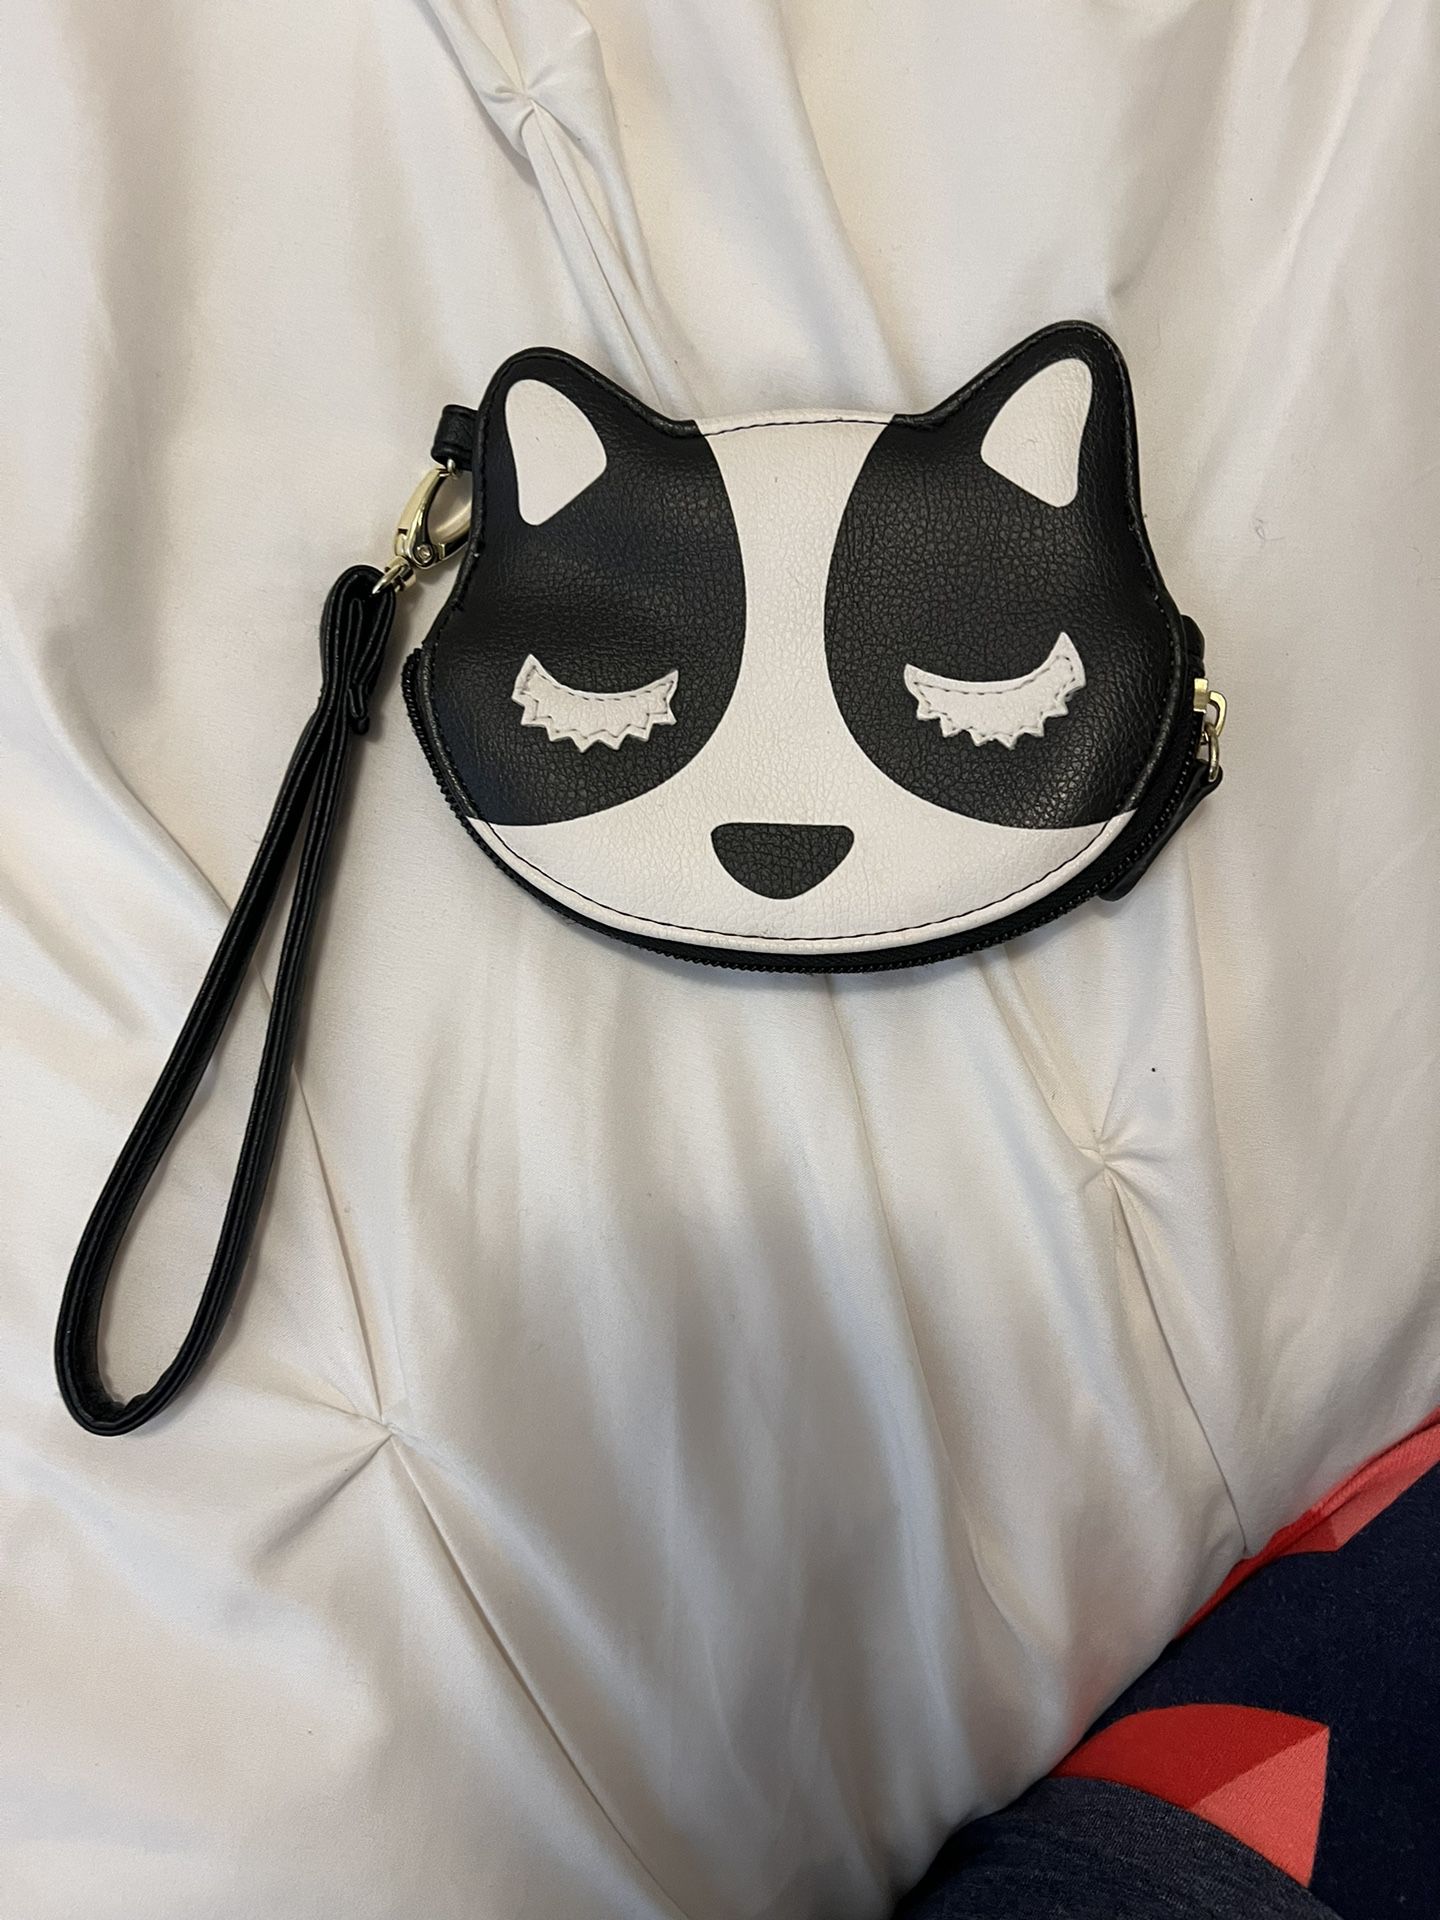 Luv Betsey by Betsey Johnson  "BULLDOG Frenchie" Coin Purse/Wristlet Black White